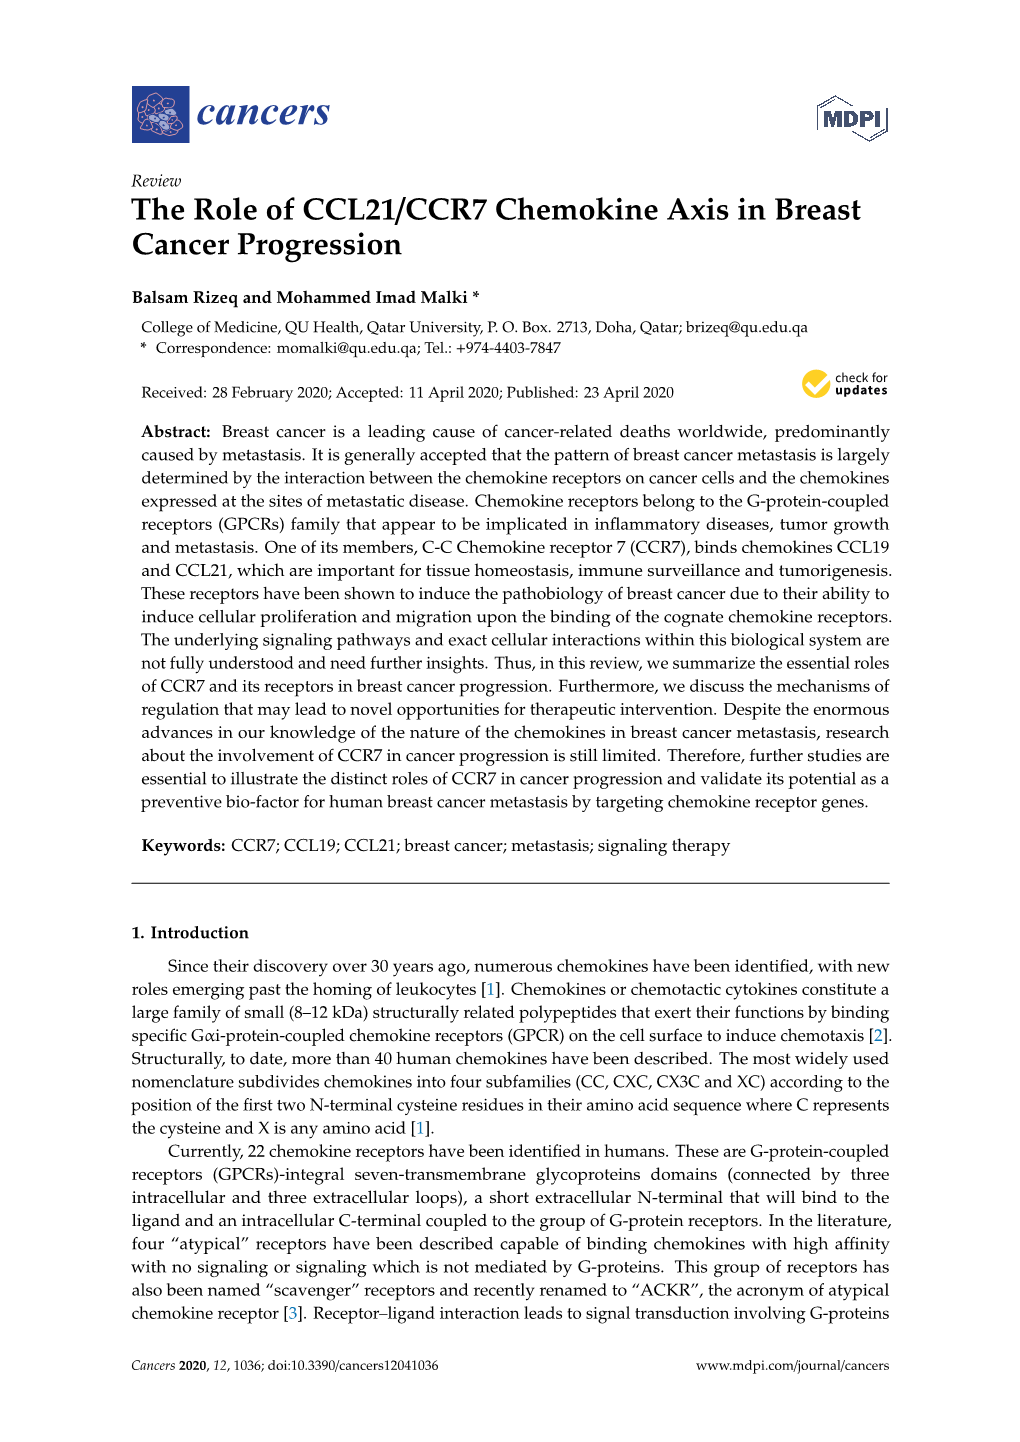 The Role of CCL21/CCR7 Chemokine Axis in Breast Cancer Progression